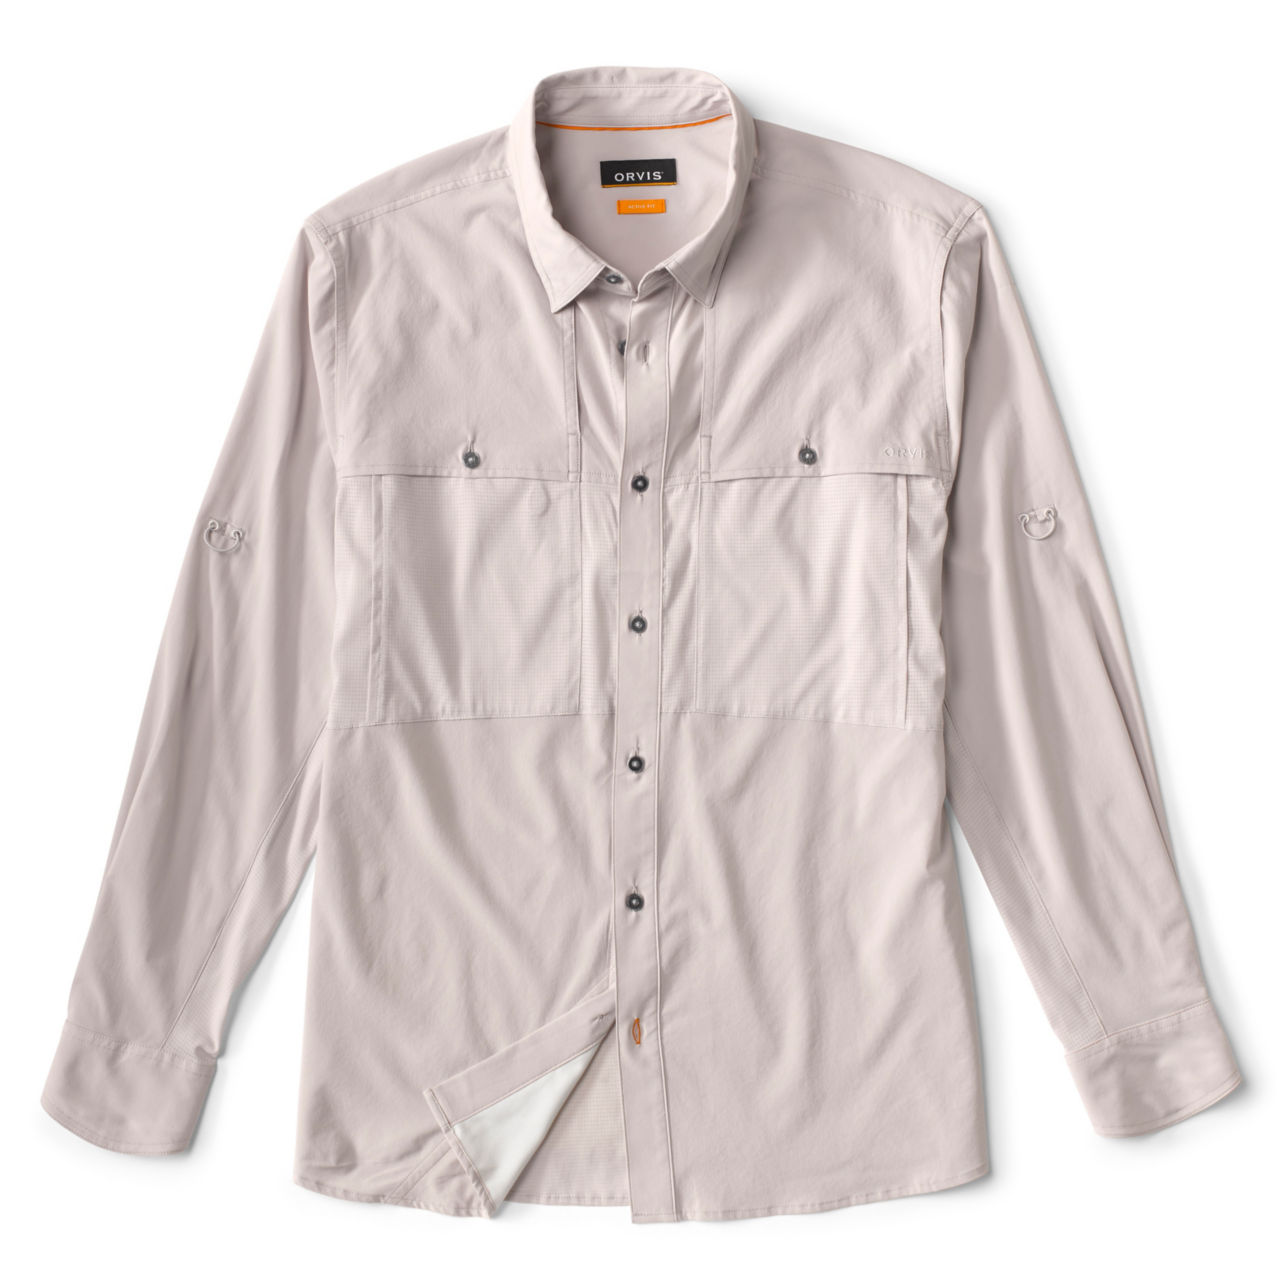 Long-Sleeved Ventilated Open Air Casting Shirt - VAPOR image number 0